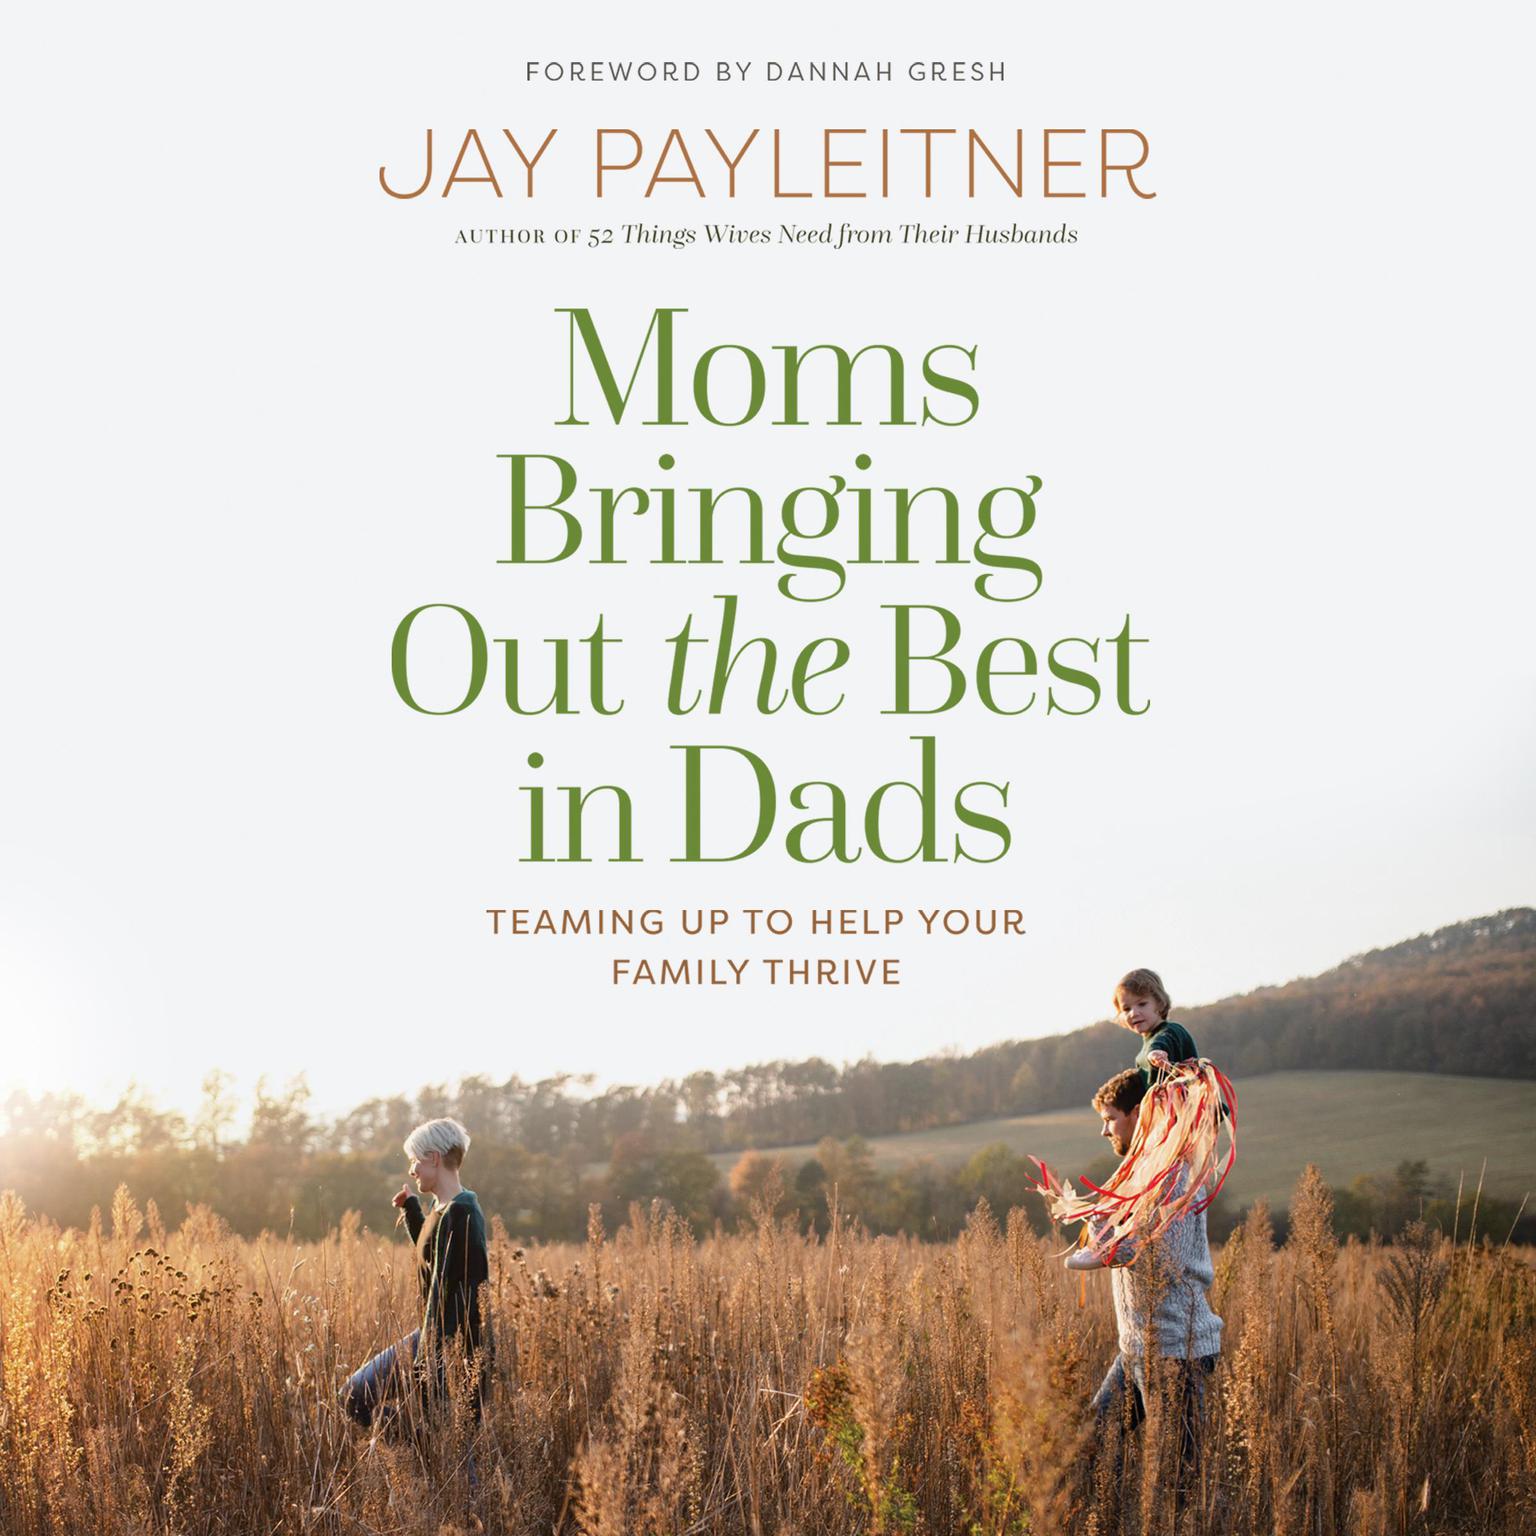 Moms Bringing Out the Best in Dads: Teaming Up to Help Your Family Thrive Audiobook, by Jay Payleitner